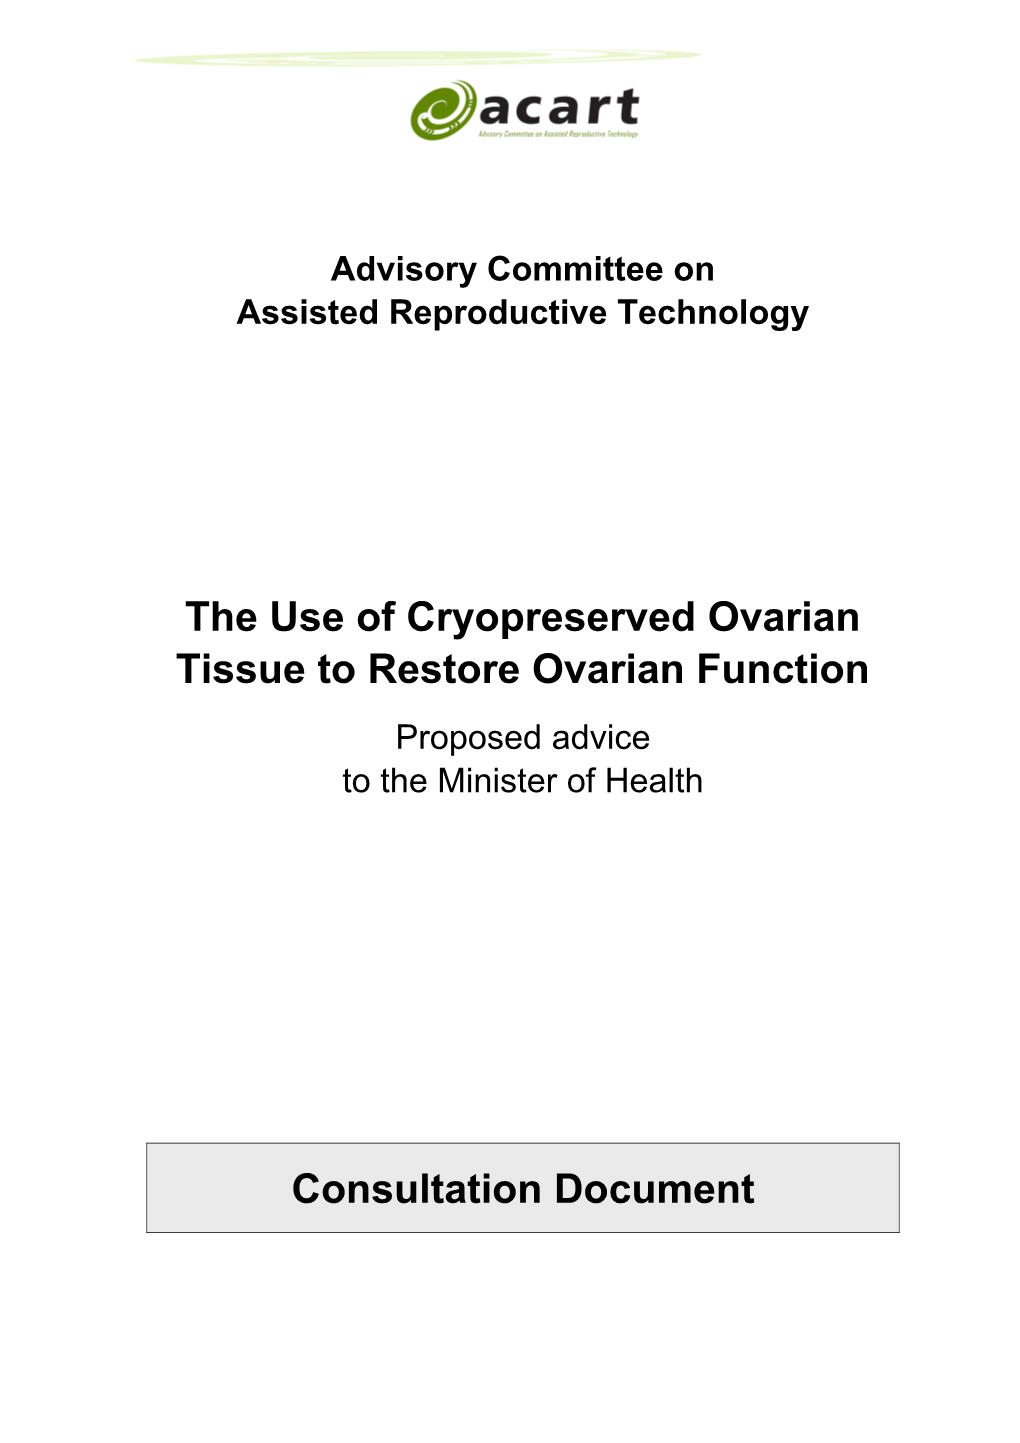 The Use of Cryopreserved Ovarian Tissue to Restore Ovarian Function